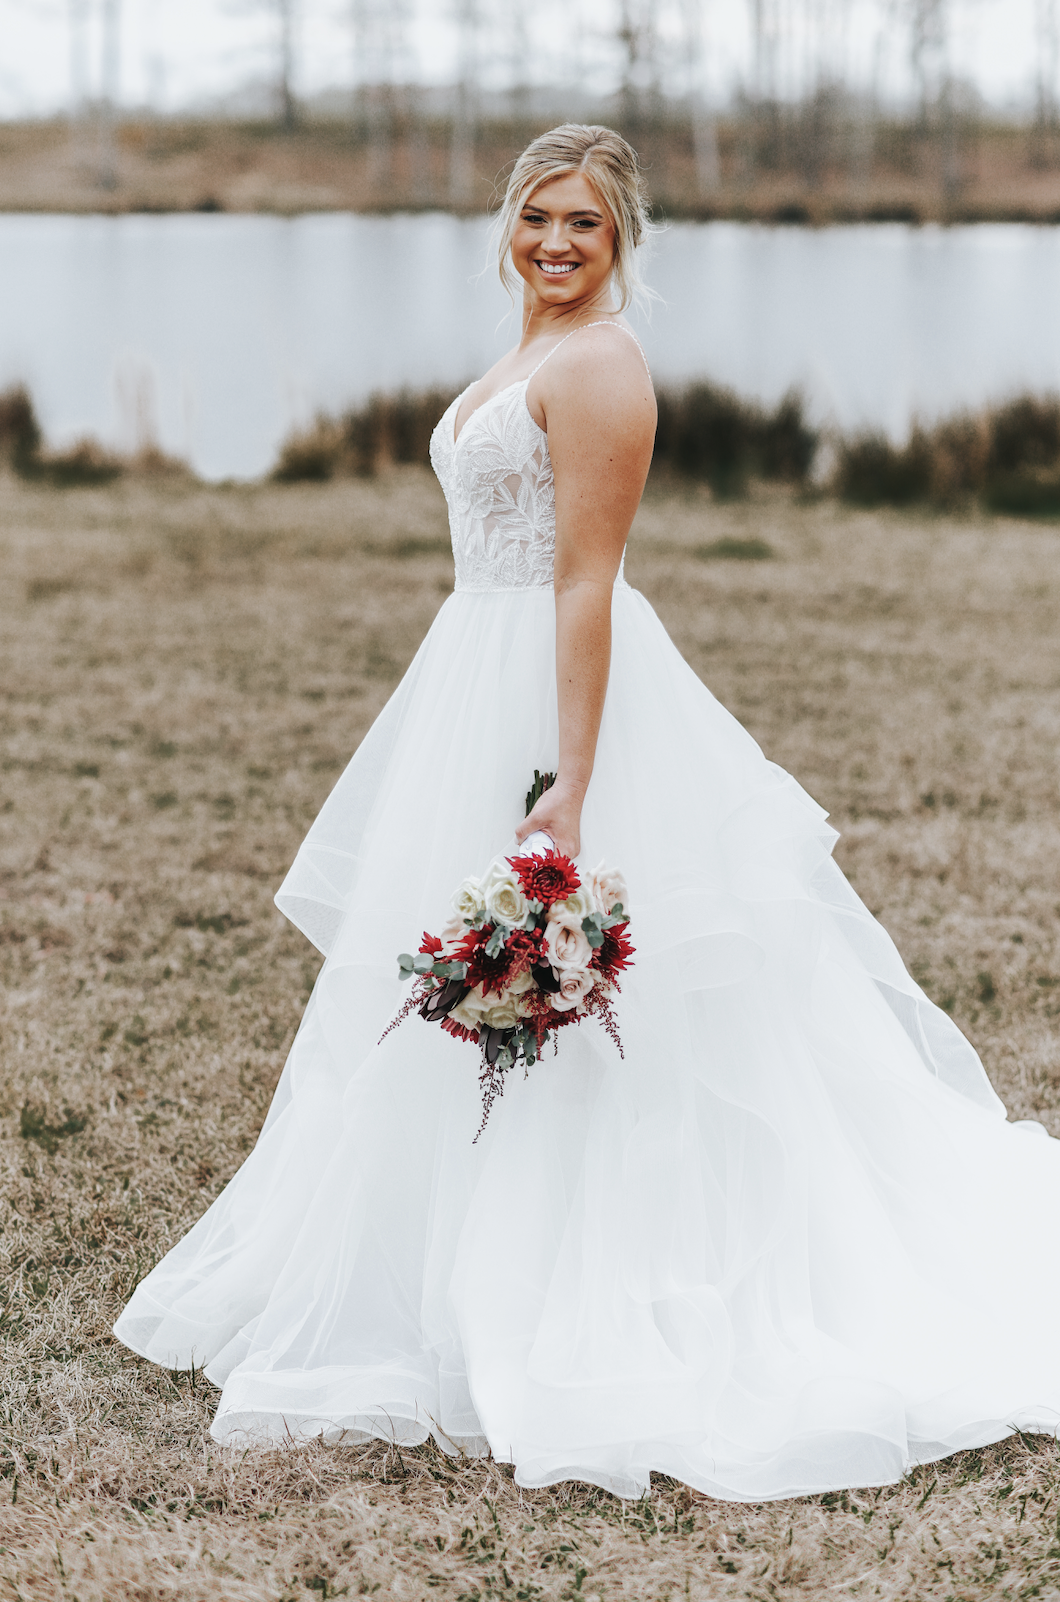 real-savannah-bride-rebecca-wearing-the-timbrey-gown-by-maggie-sottero-romantic-ballgown-with-tiered-tulle-skirt-horsehair-trim-spaghetti-straps-lace-purchased-from-savannah-bridal-shop-and-savannah-bridal-boutique-ivory-and-beau-2.png